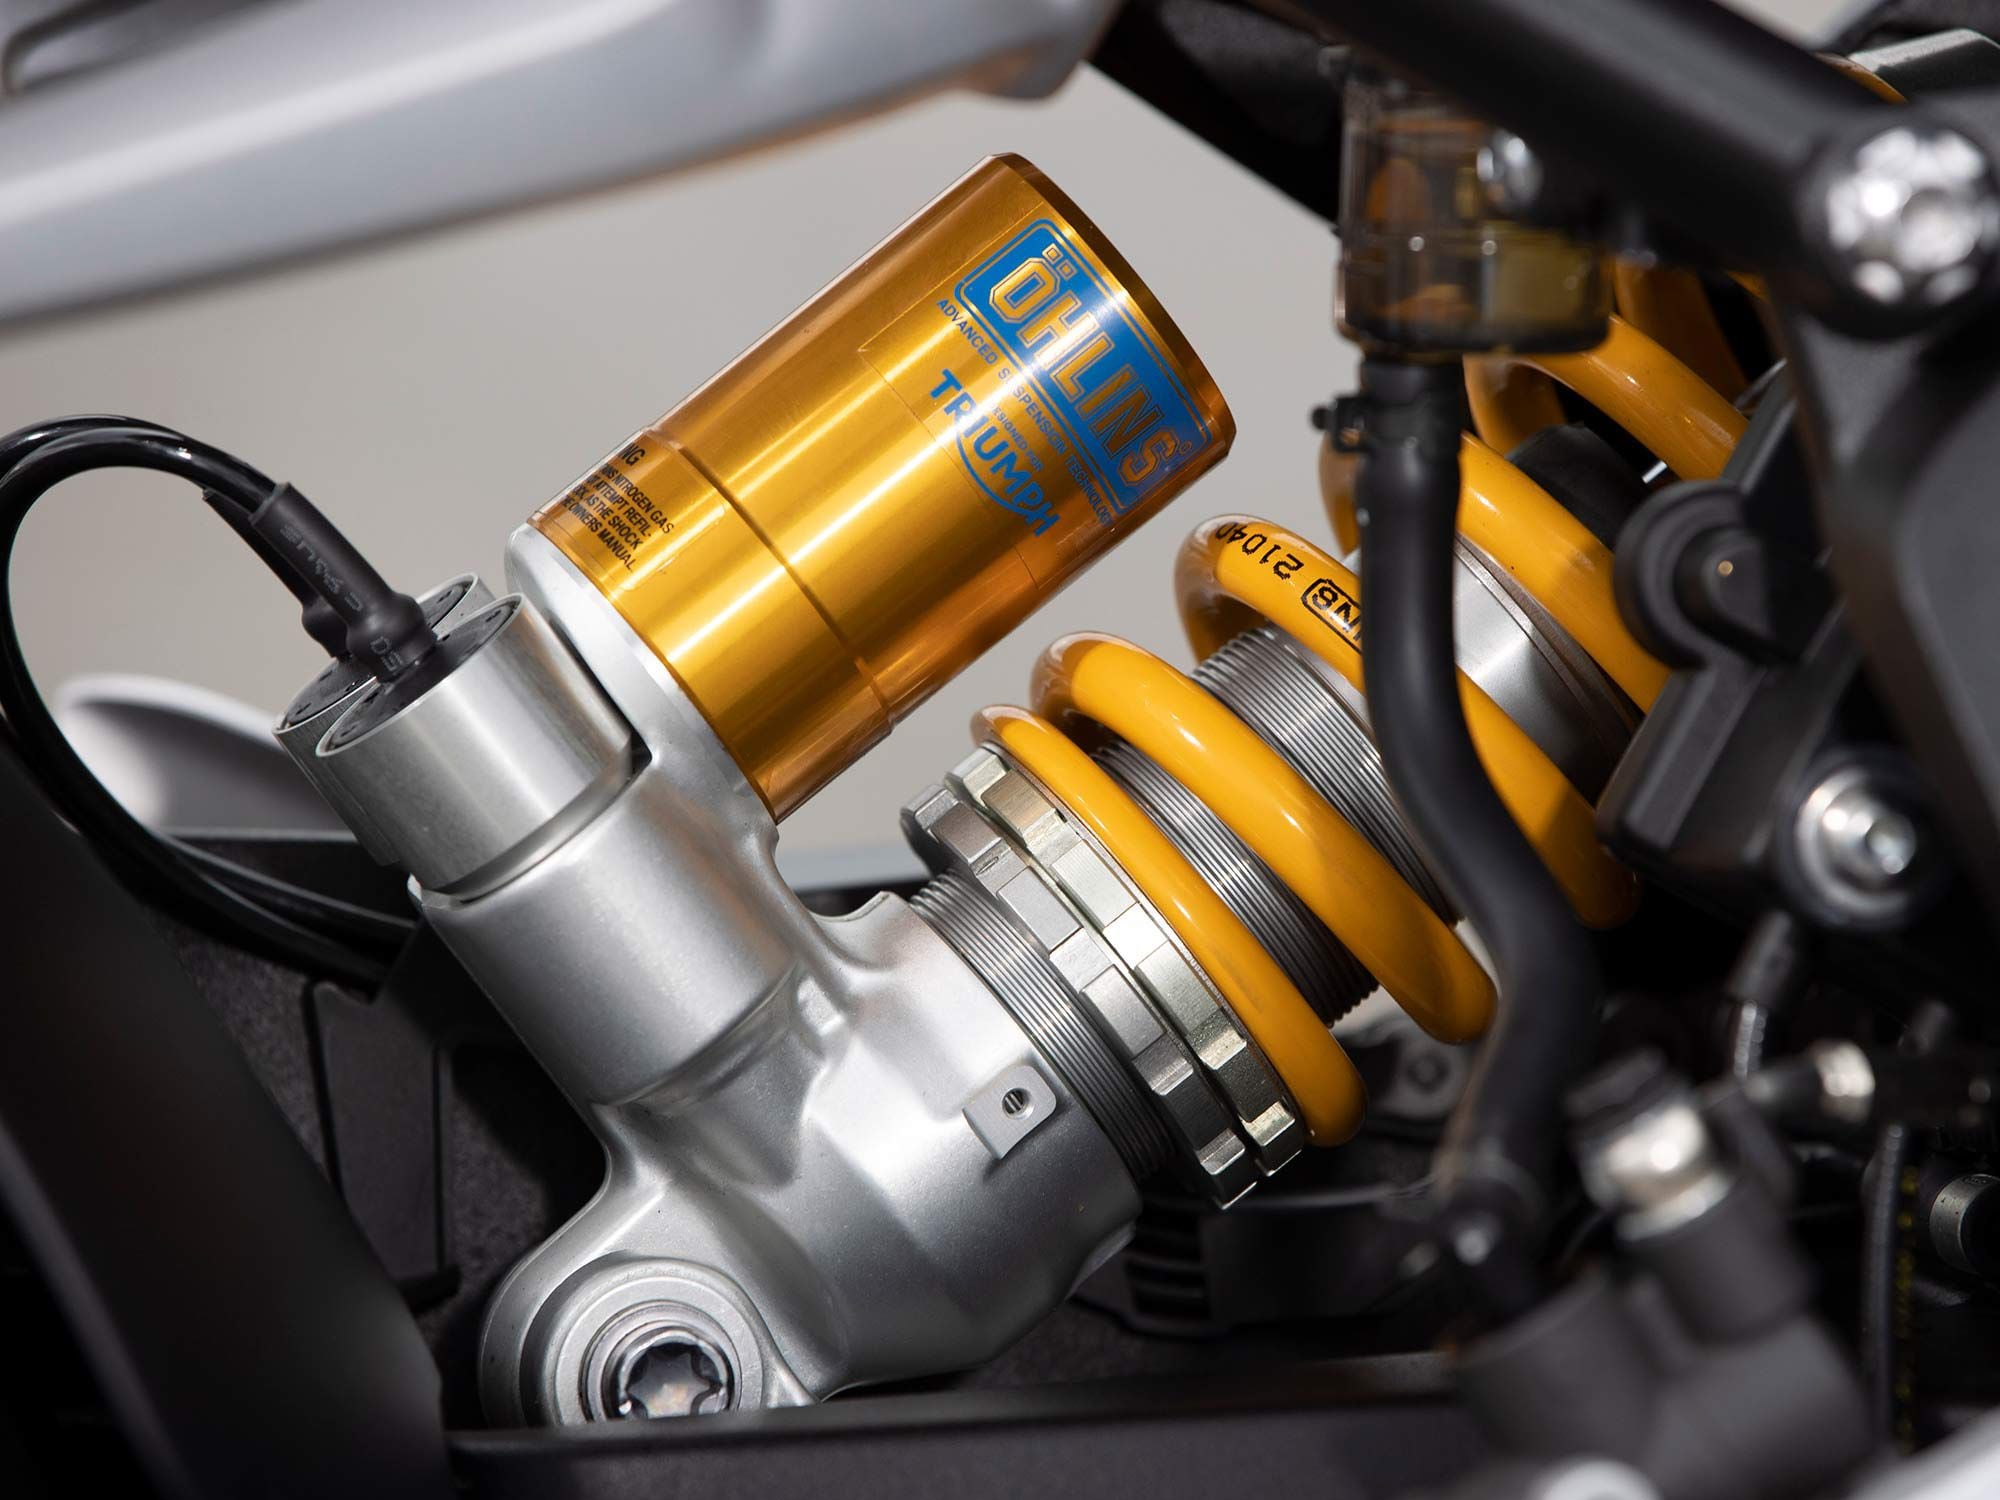 The Speed Triple 1200 gets Öhlins’ Smart EC 2.0 electronically adjustable semi-active suspension, front and rear.